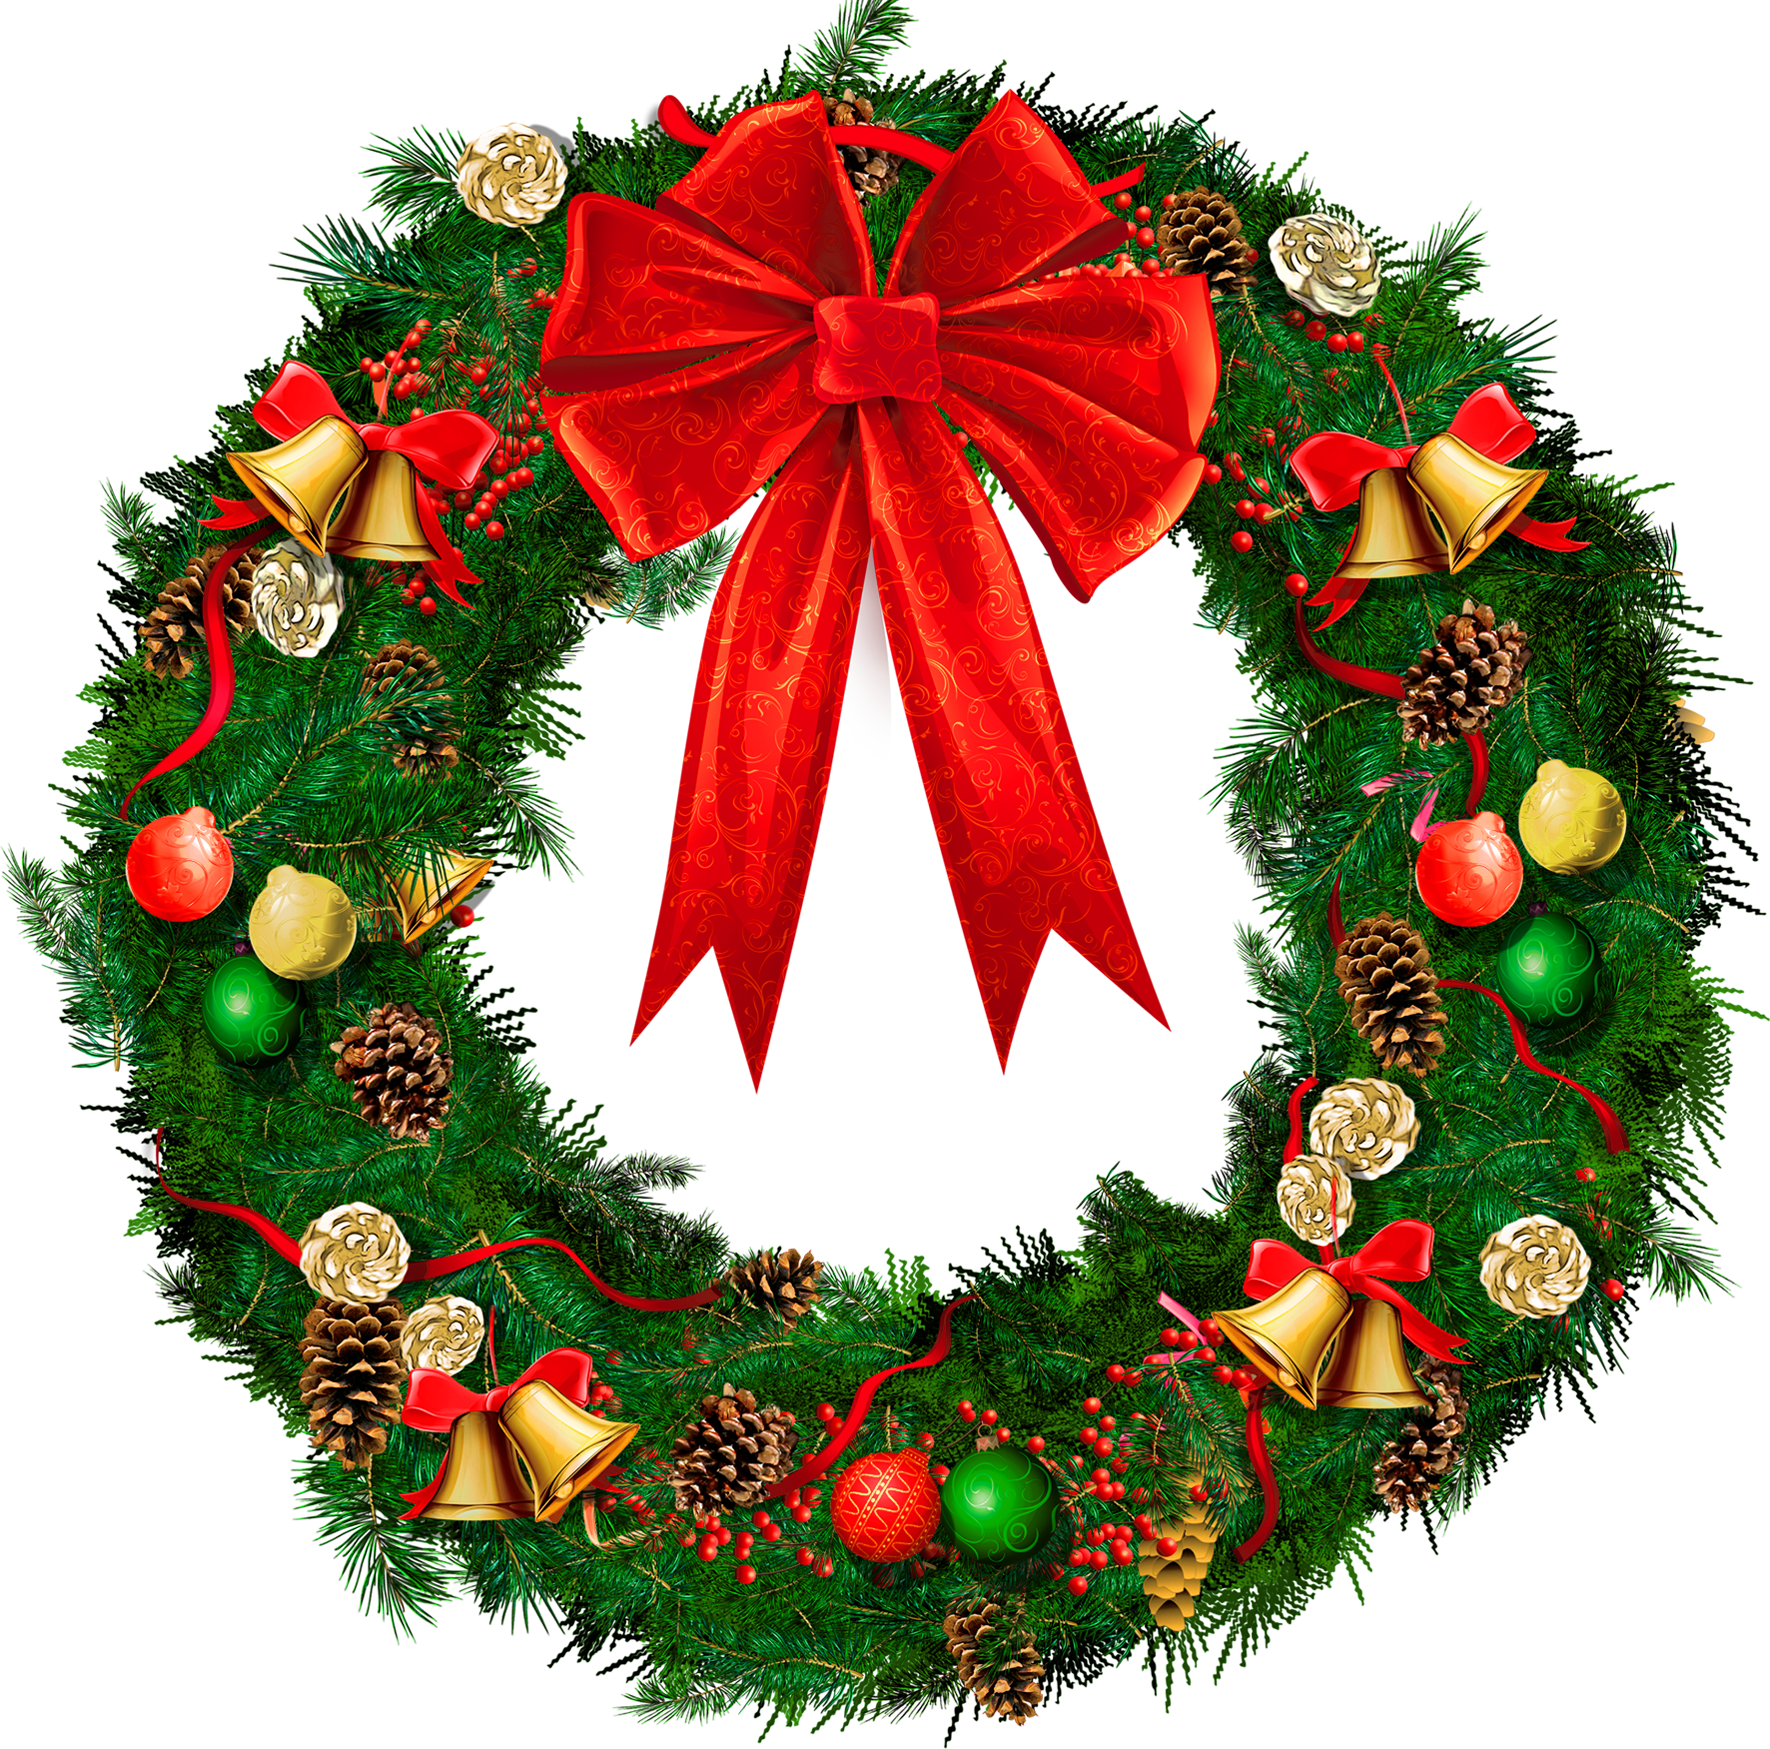 Images skudin surf wreathclipartfreeclipartimages. Free clipart wreath